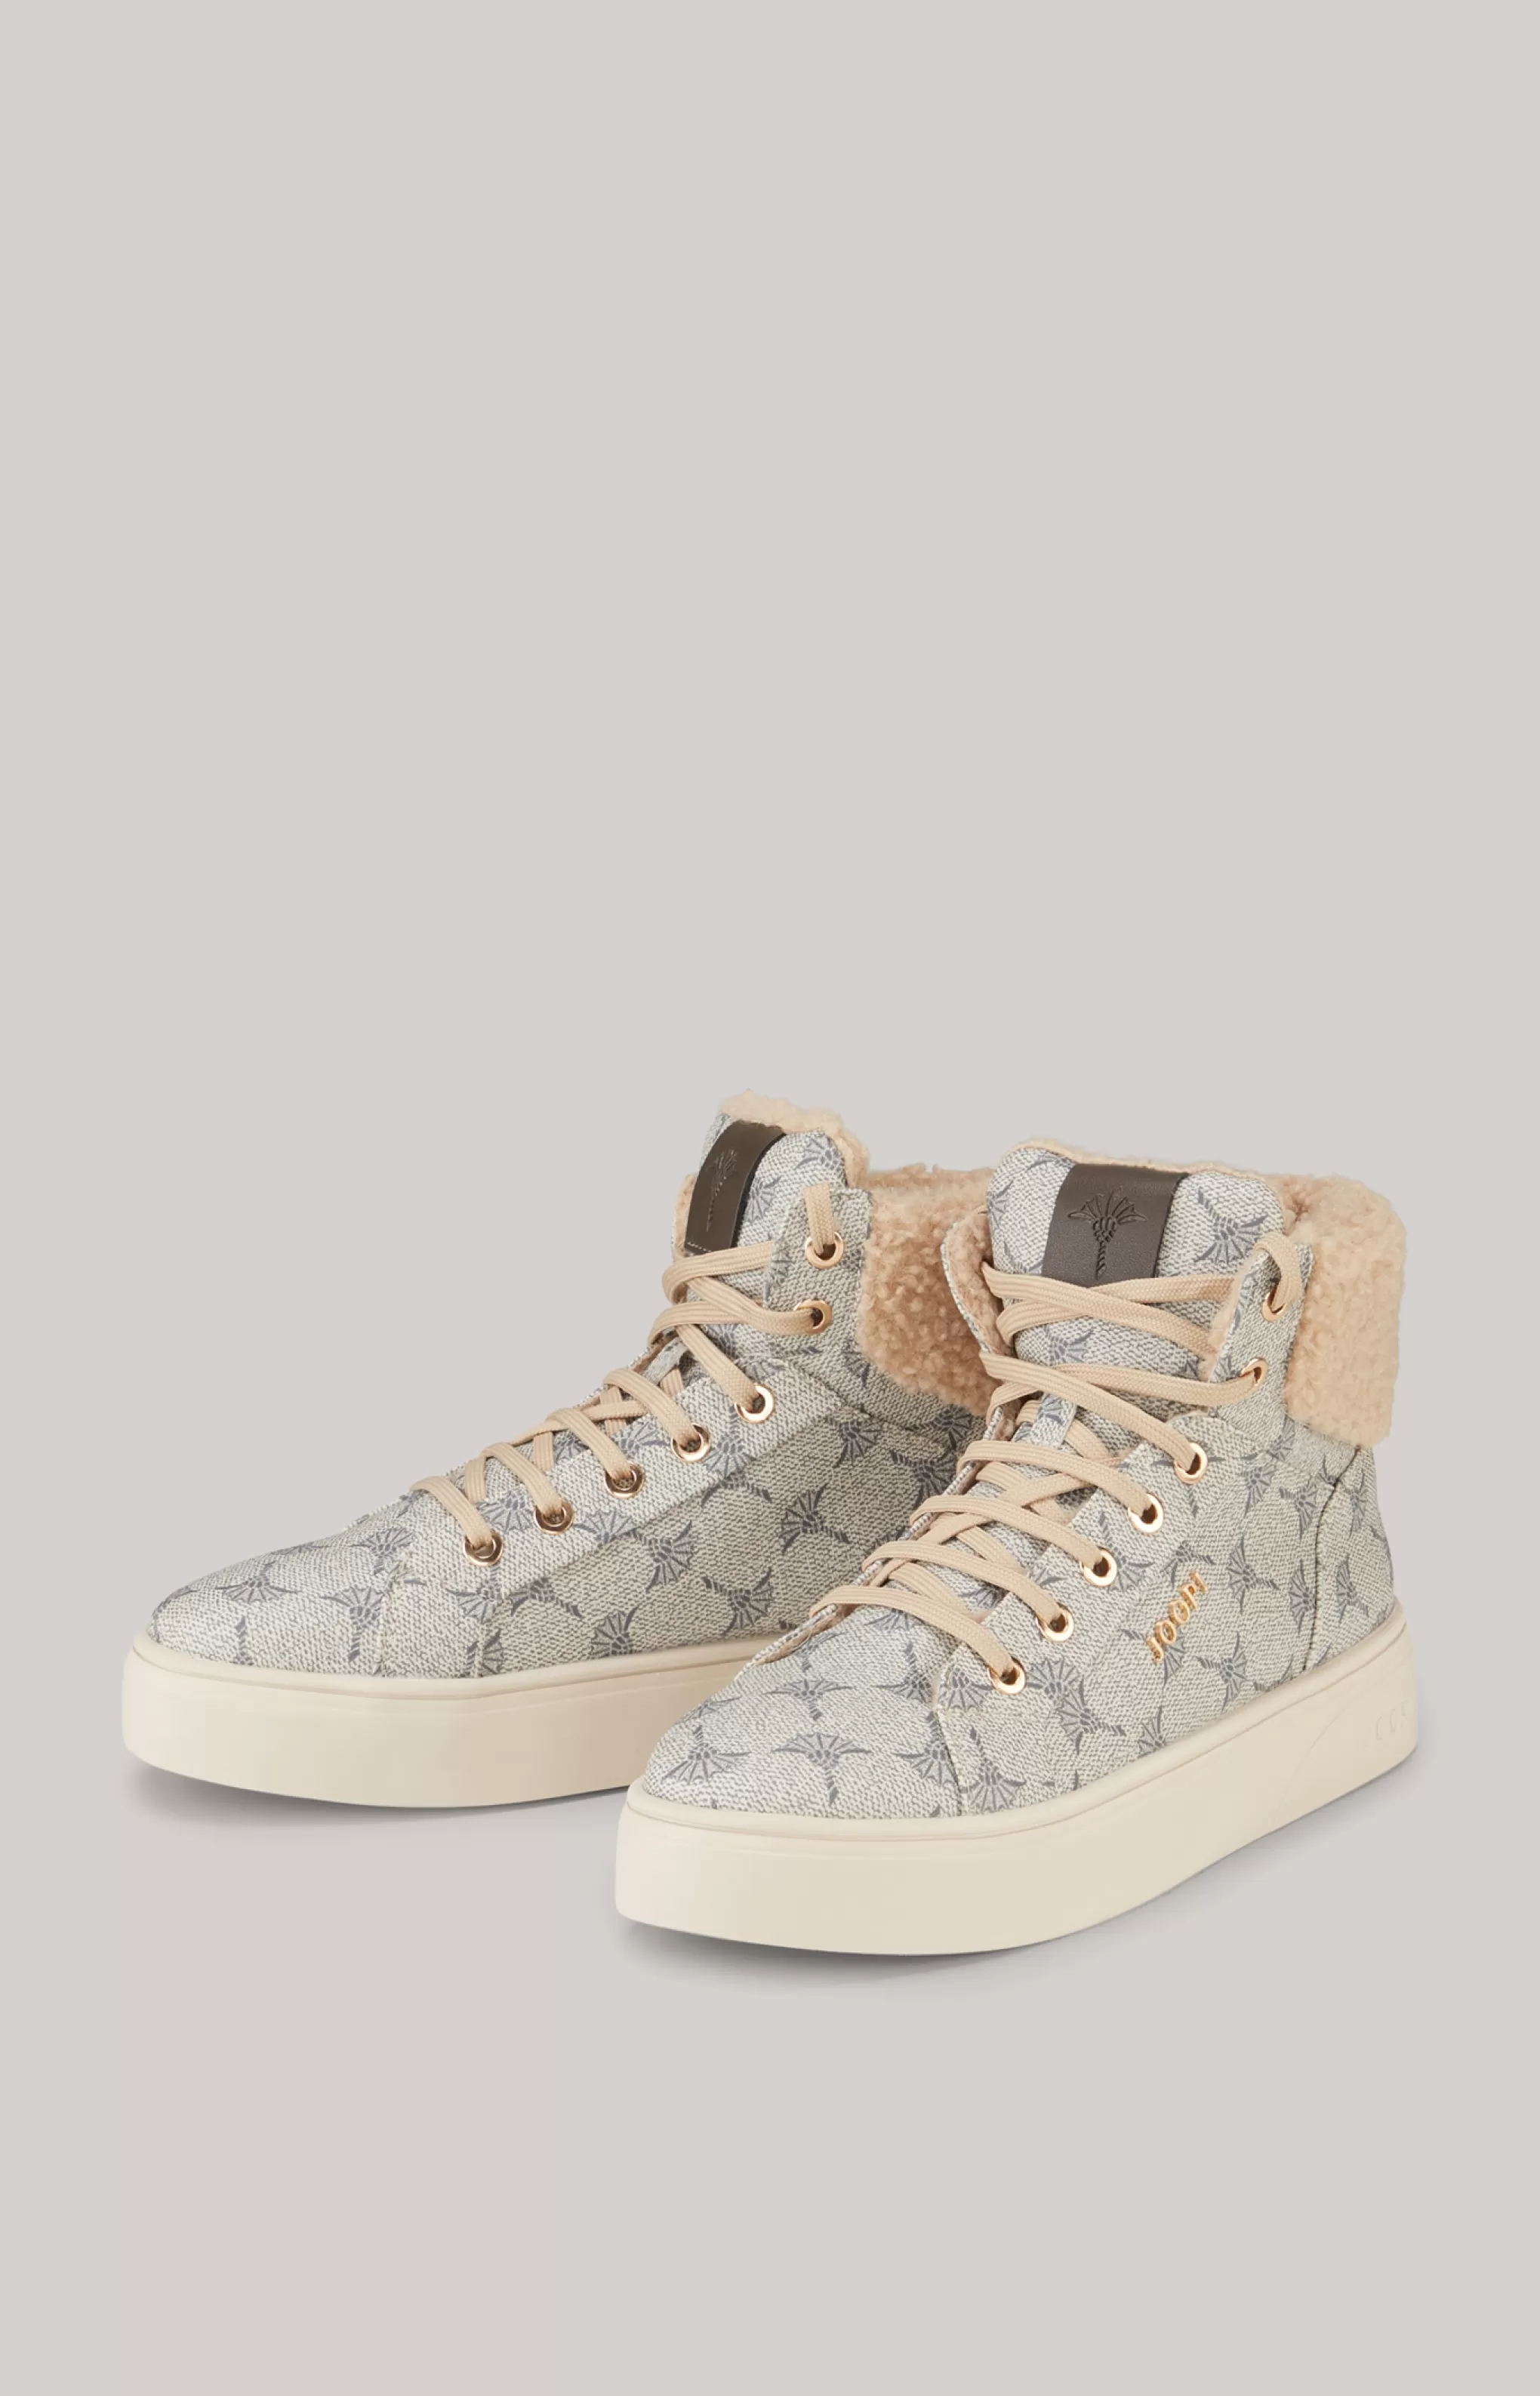 Shoes*JOOP Shoes Mazzolino Peluche New Daphne High-top Trainers in /Grey